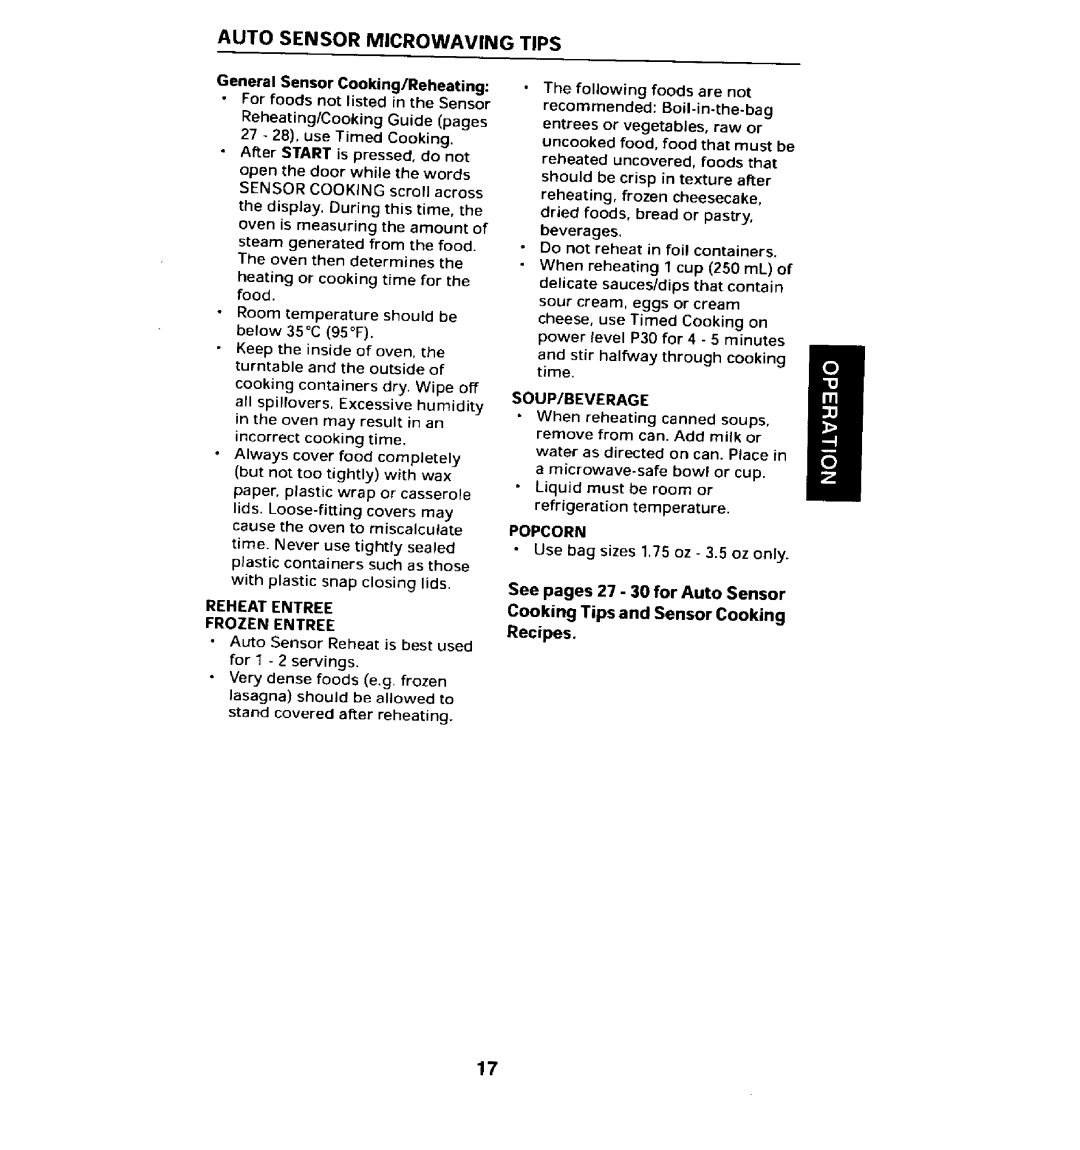 Maytag MMV5100AA Auto Sensor Microwaving Tips, Reheat Entree Frozen Entree, Popcorn, See pages 27 - 30 for Auto Sensor 